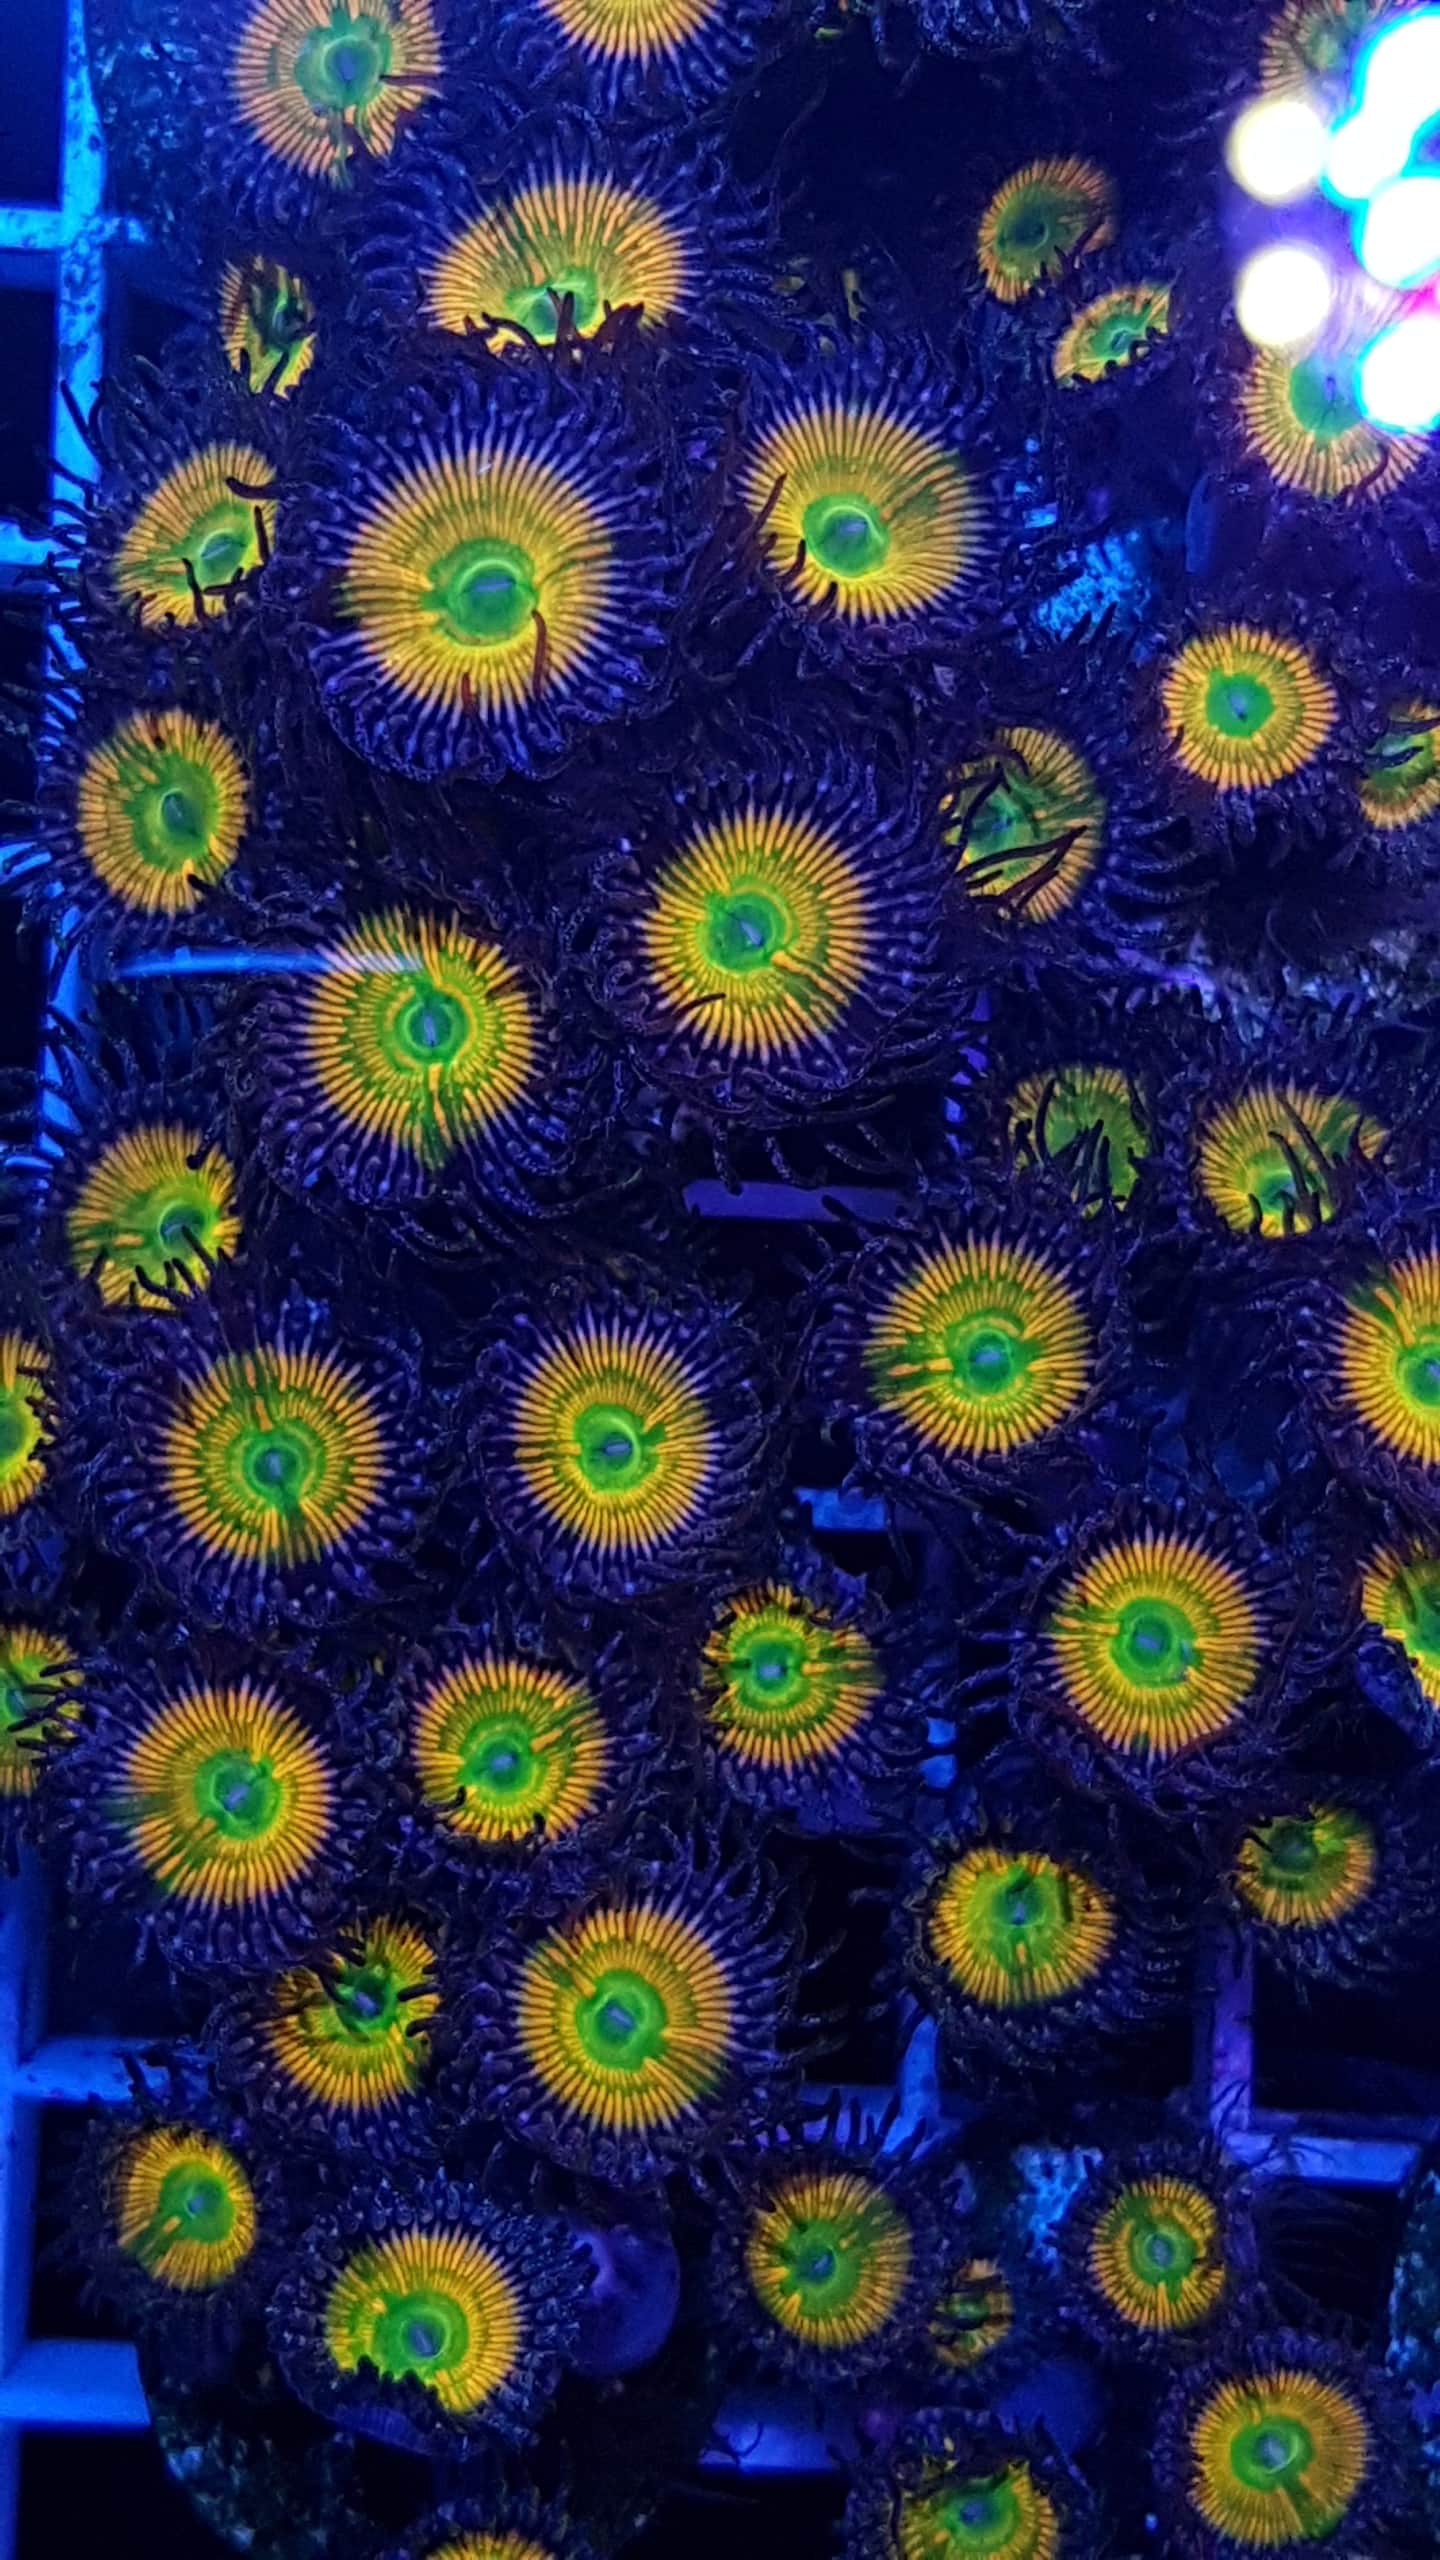 Zoa/Paly Utter Chaos mind 5 Polypen